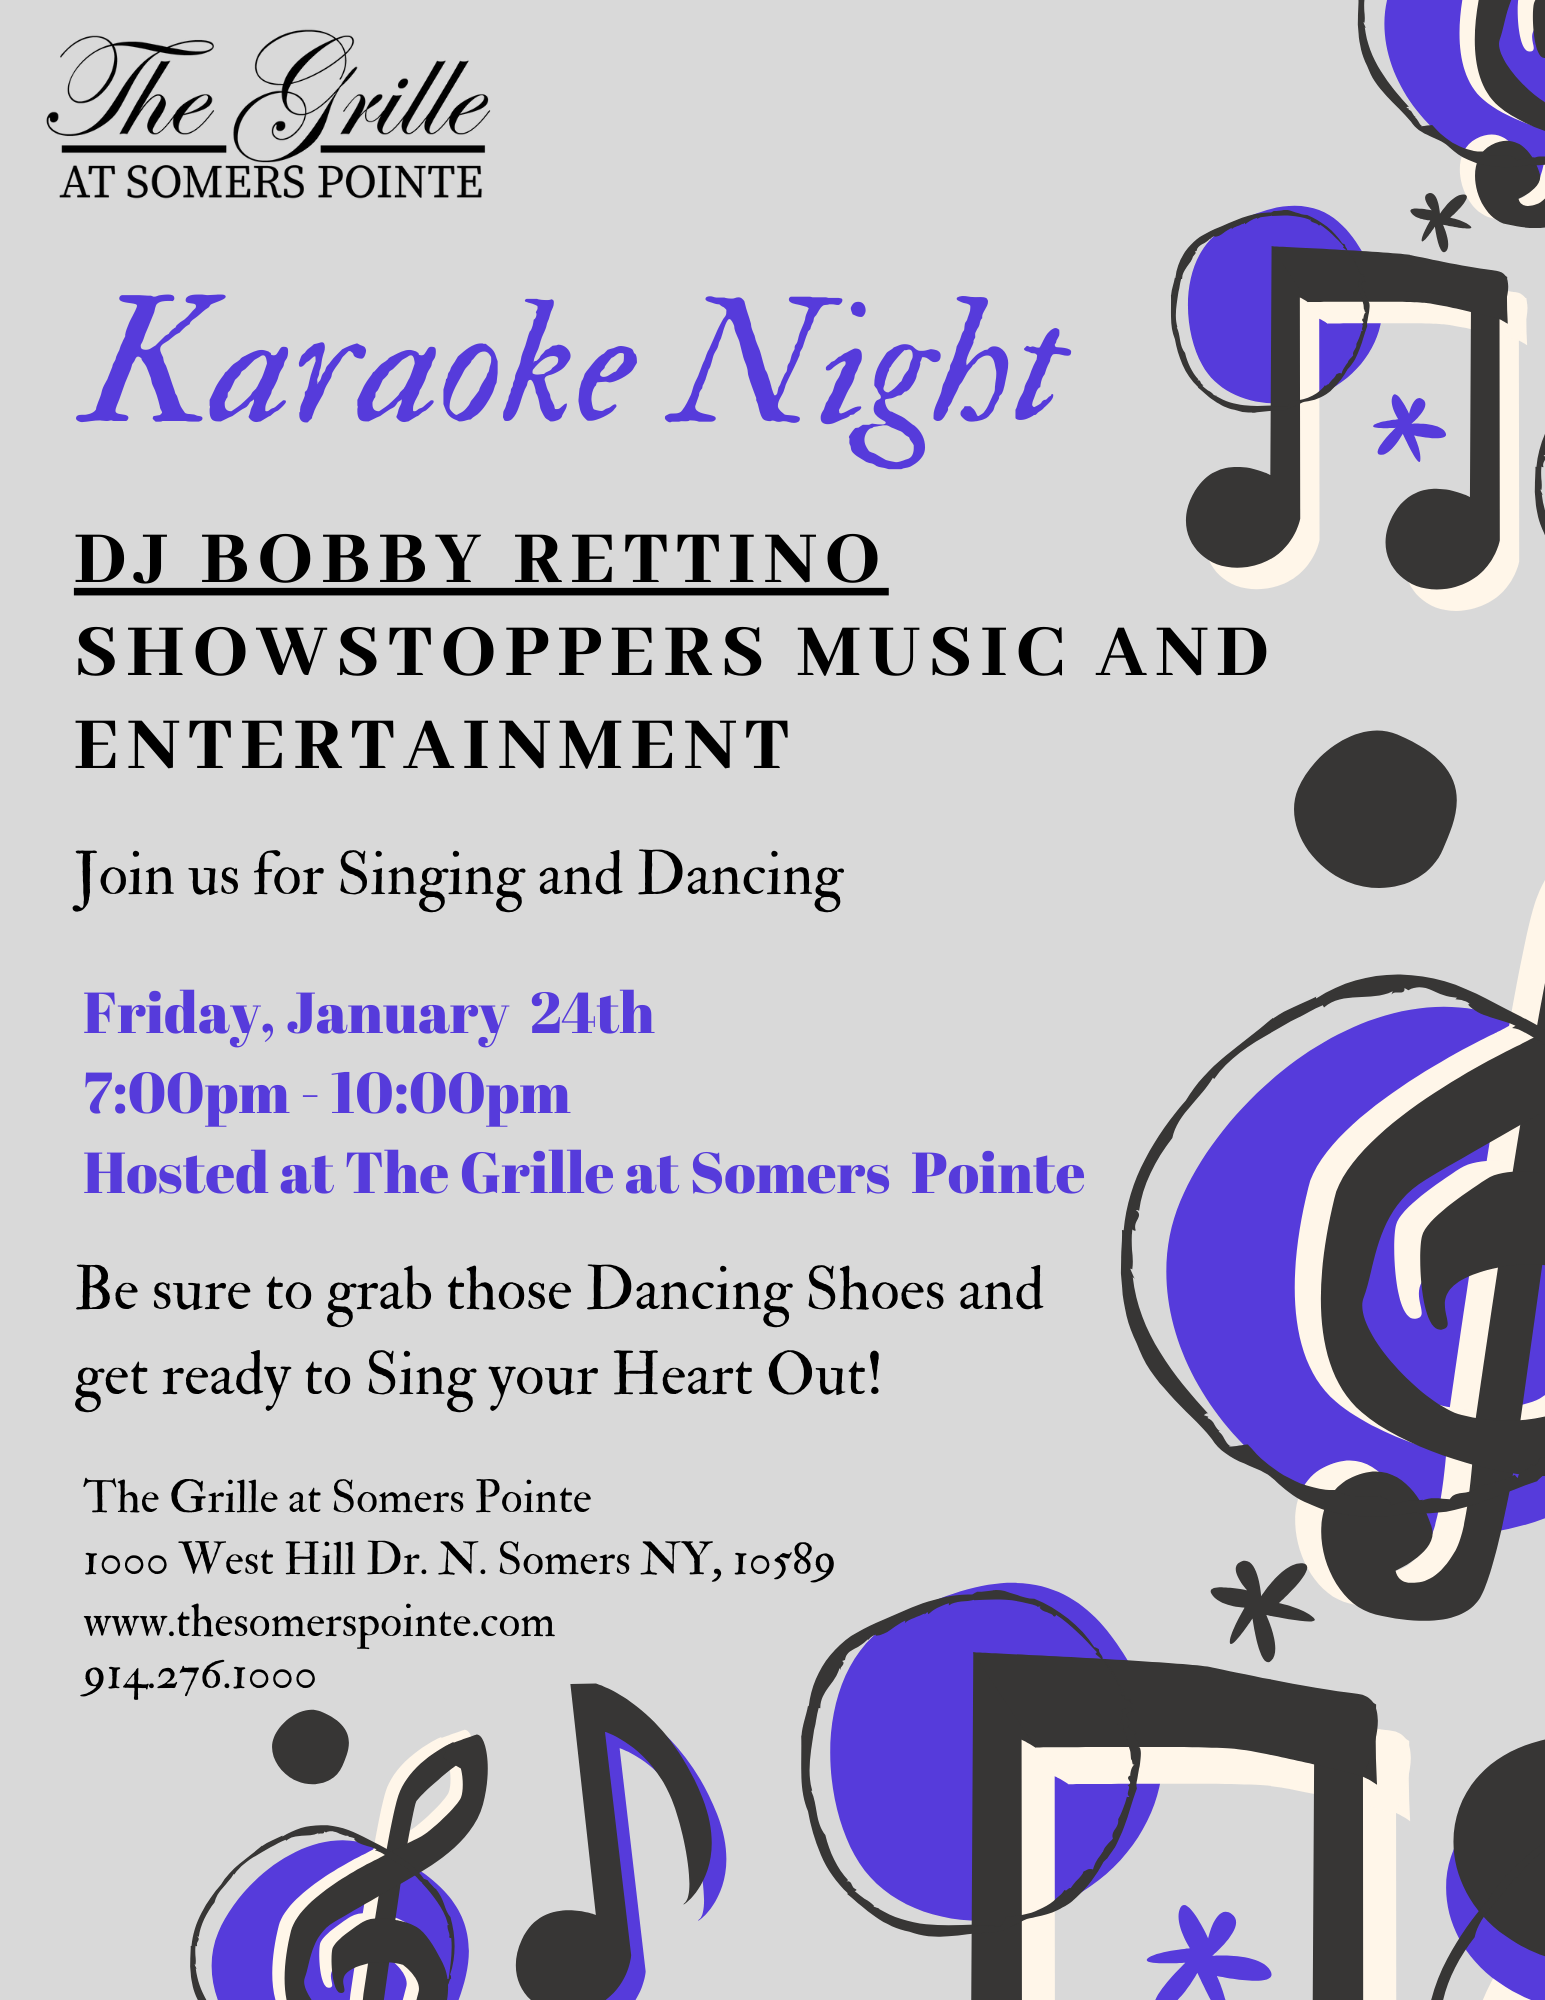 Karaoke Night Event Details- The Somers Pointe & The Grille at Somers Pointe